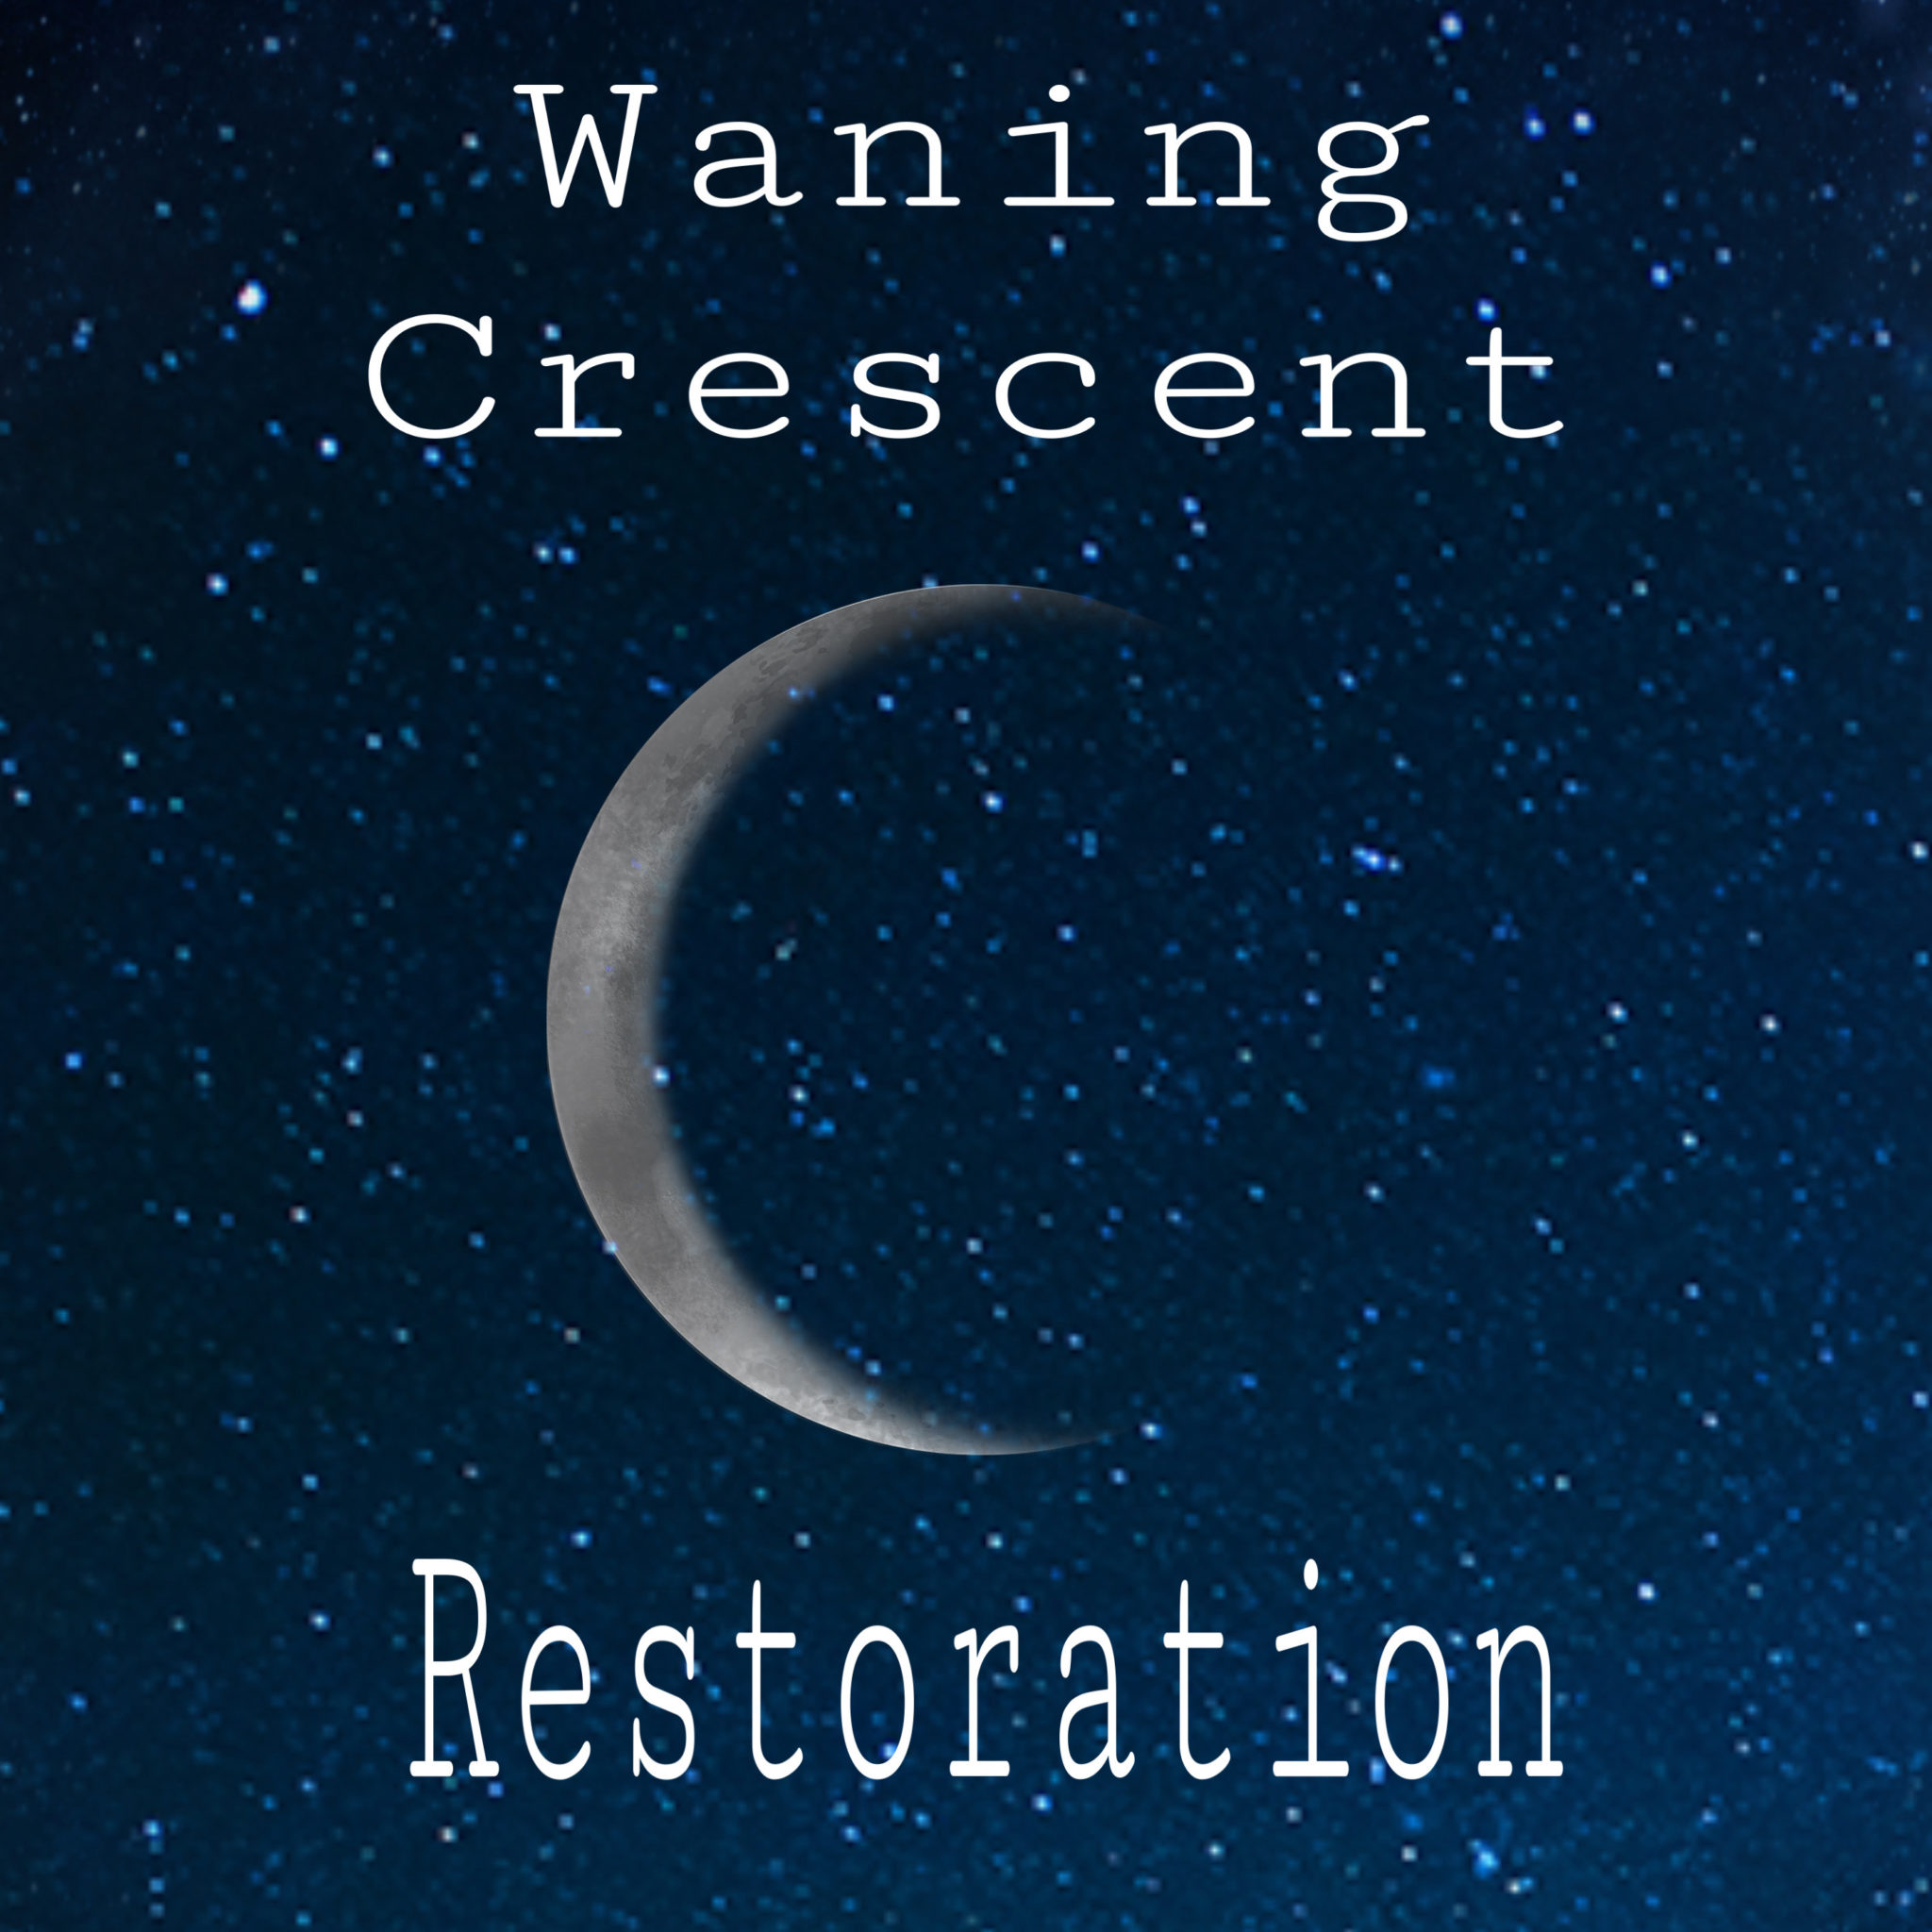 How to Manifest with the Moon's Phases - Waning Crescent Moon